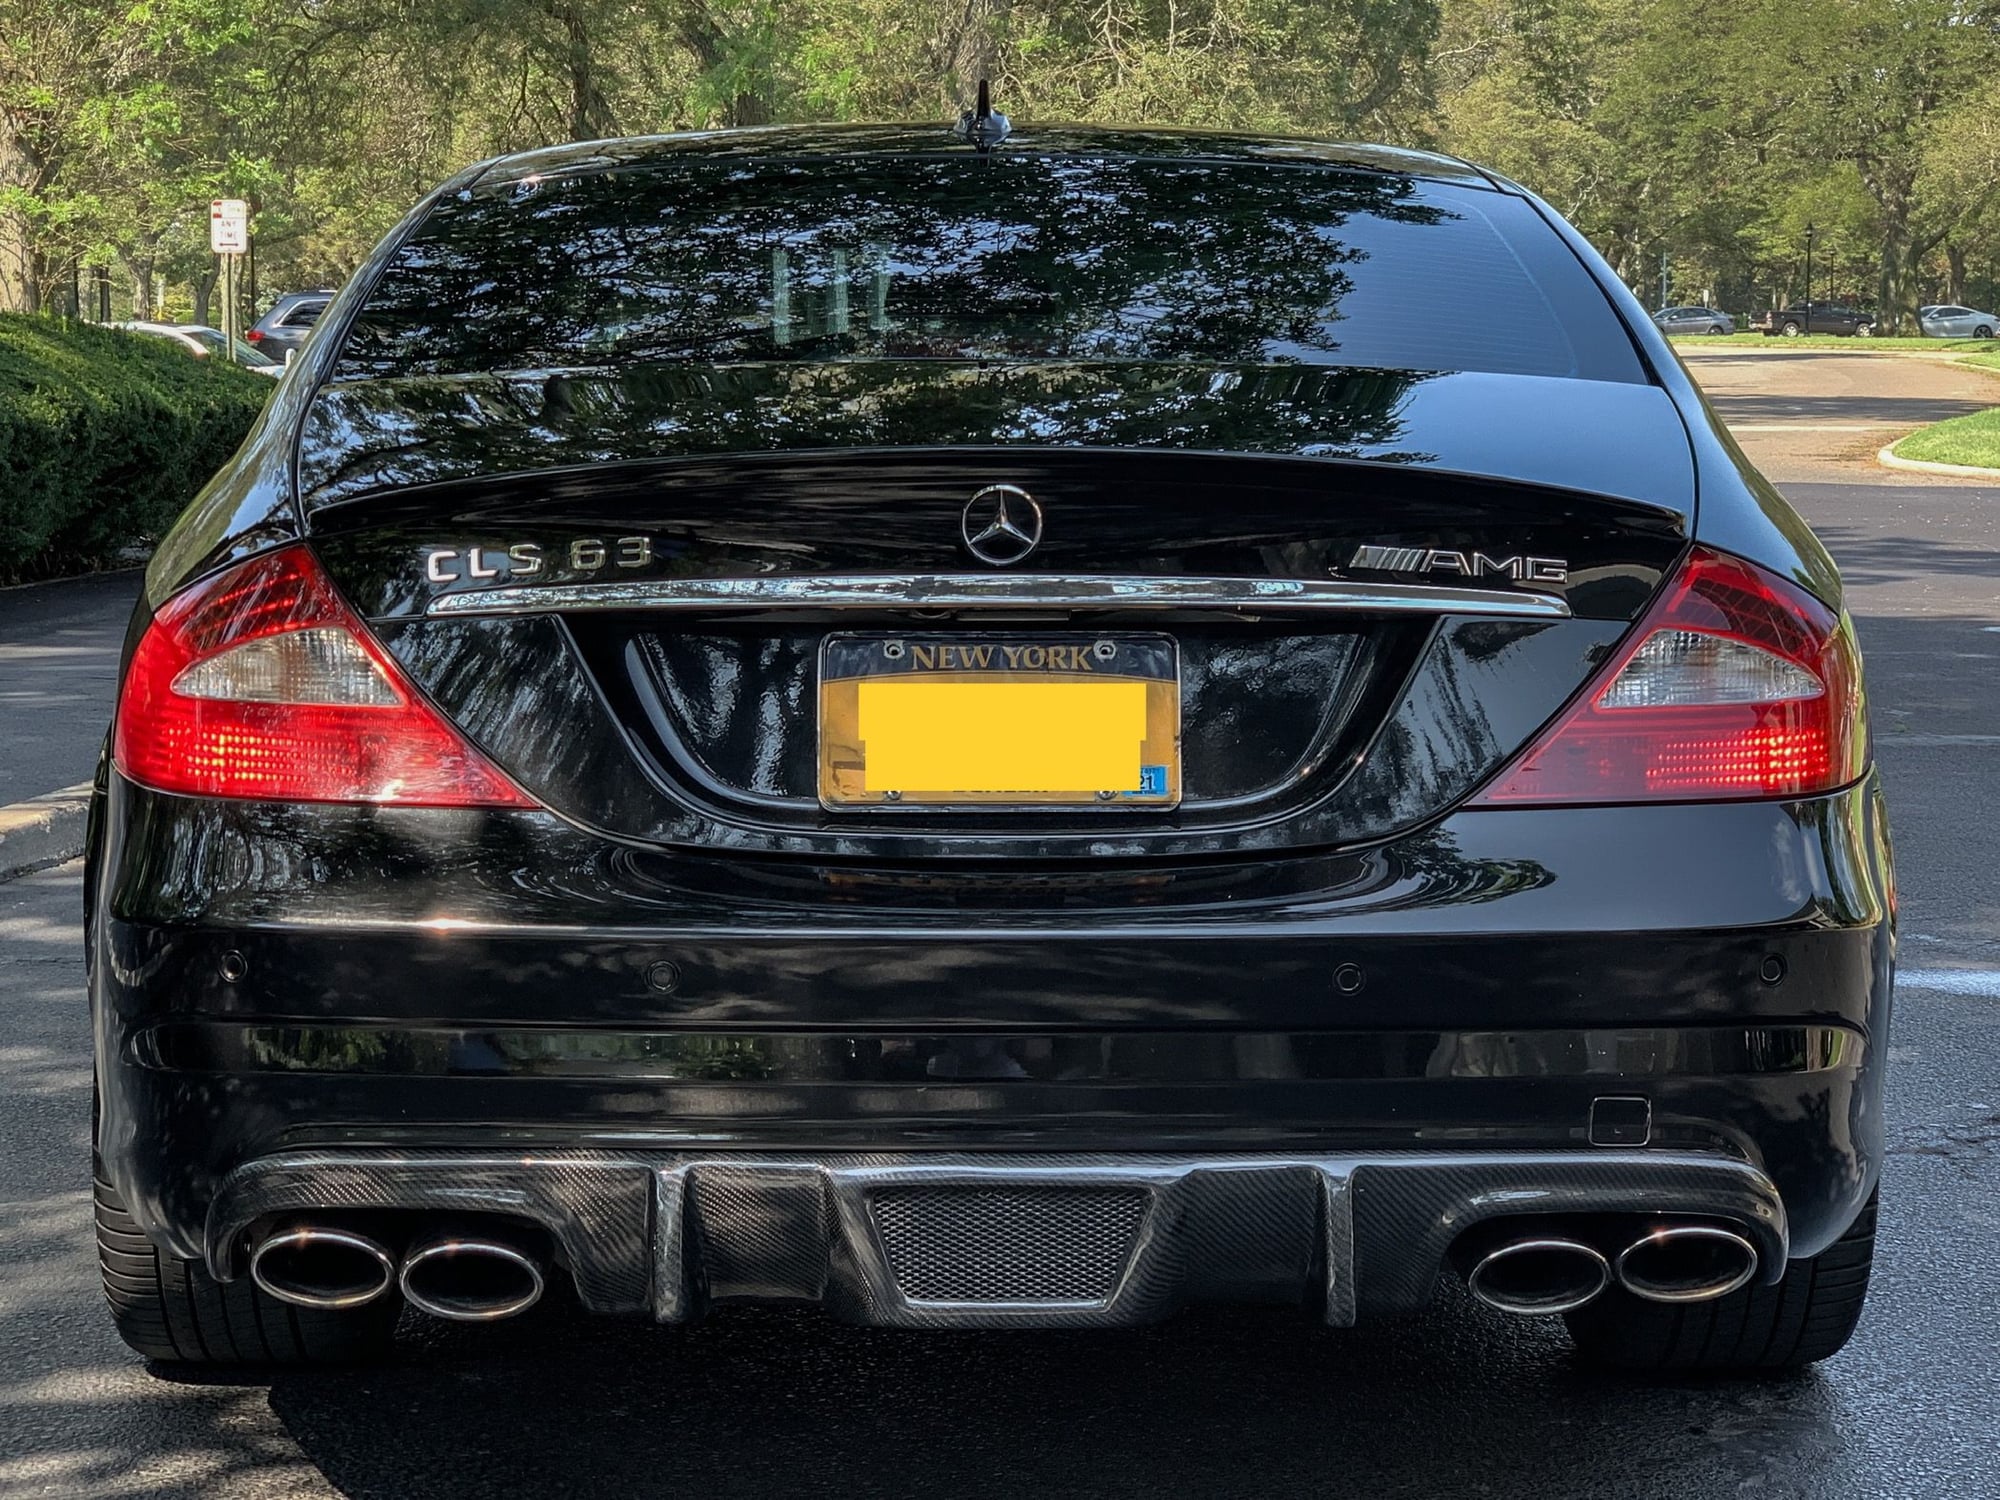 2008 Mercedes-Benz CLS63 AMG - 2 owner 2008 CLS63 AMG 69k miles - Used - VIN WDDDJ77X38A131736 - 69,800 Miles - Merrick, NY 11566, United States